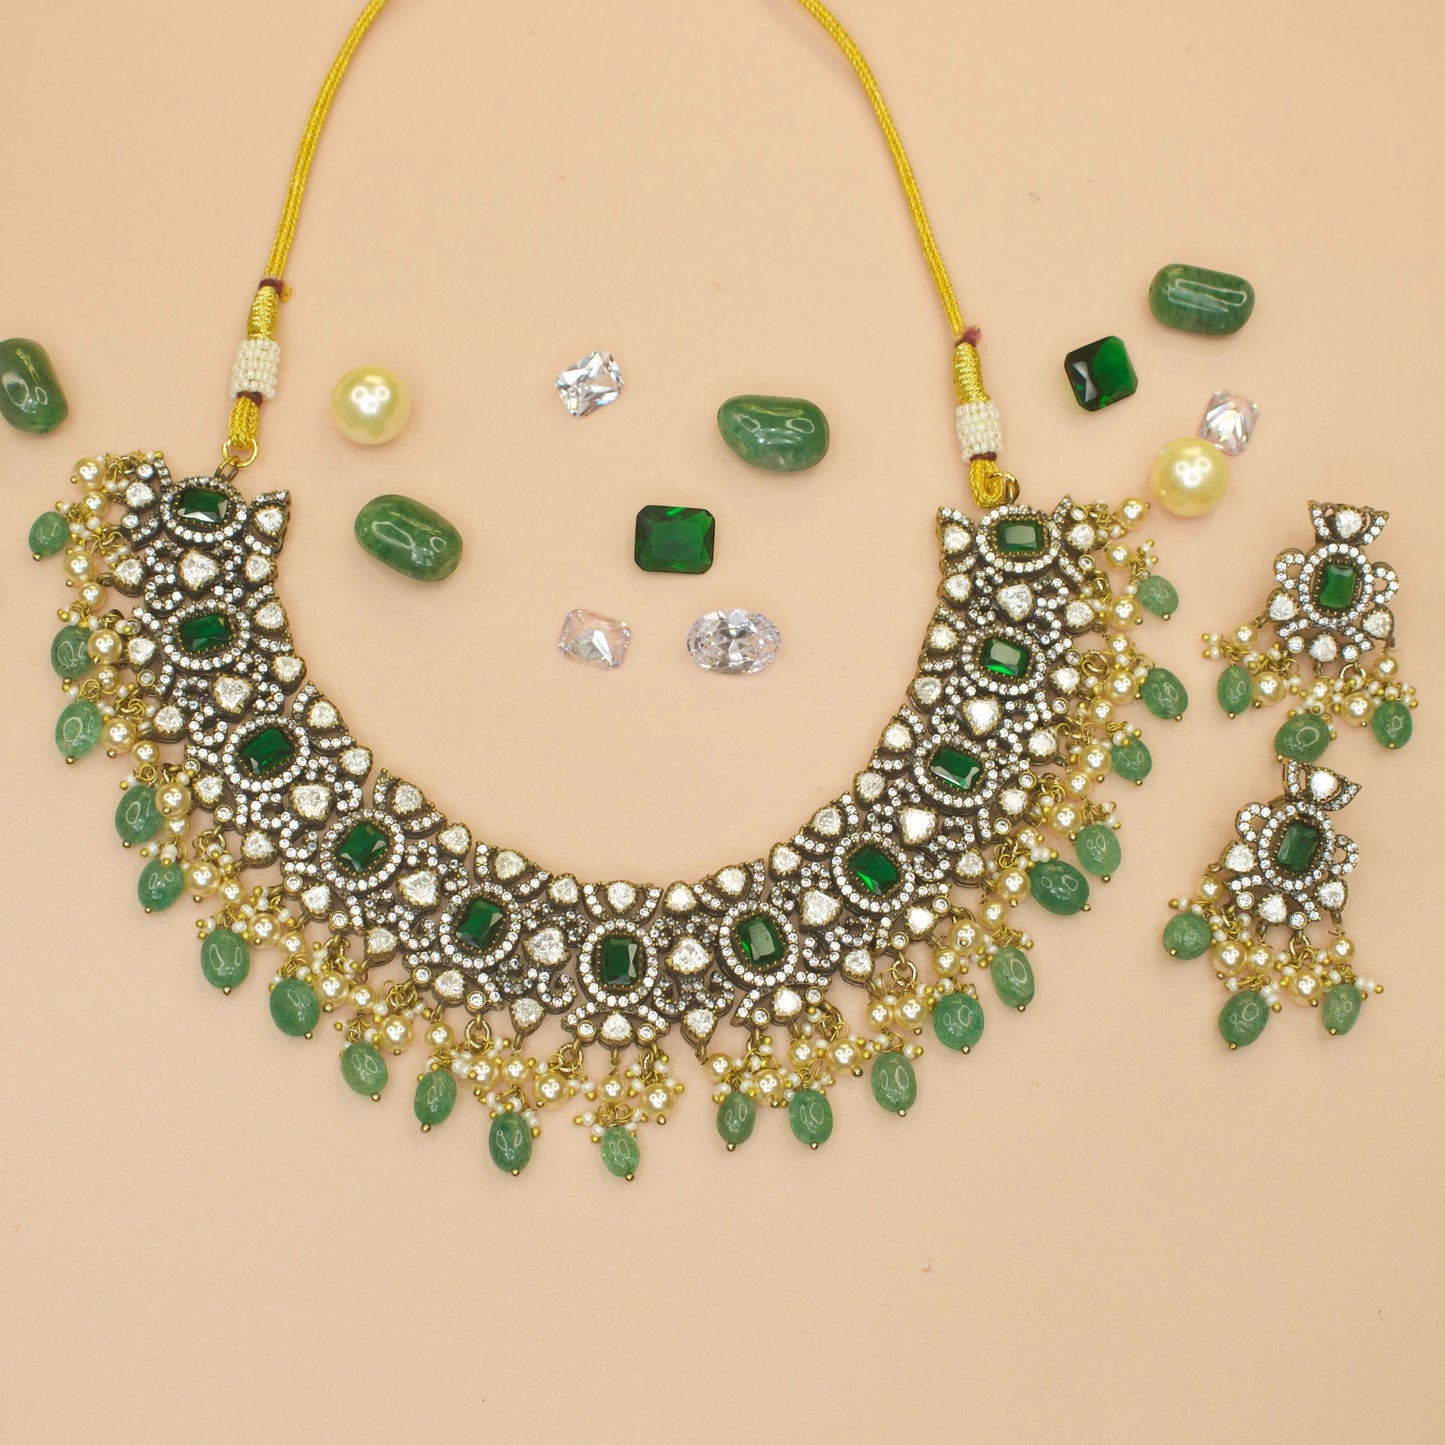 Radiant Victorian Necklace Set with Zircon & Pearls